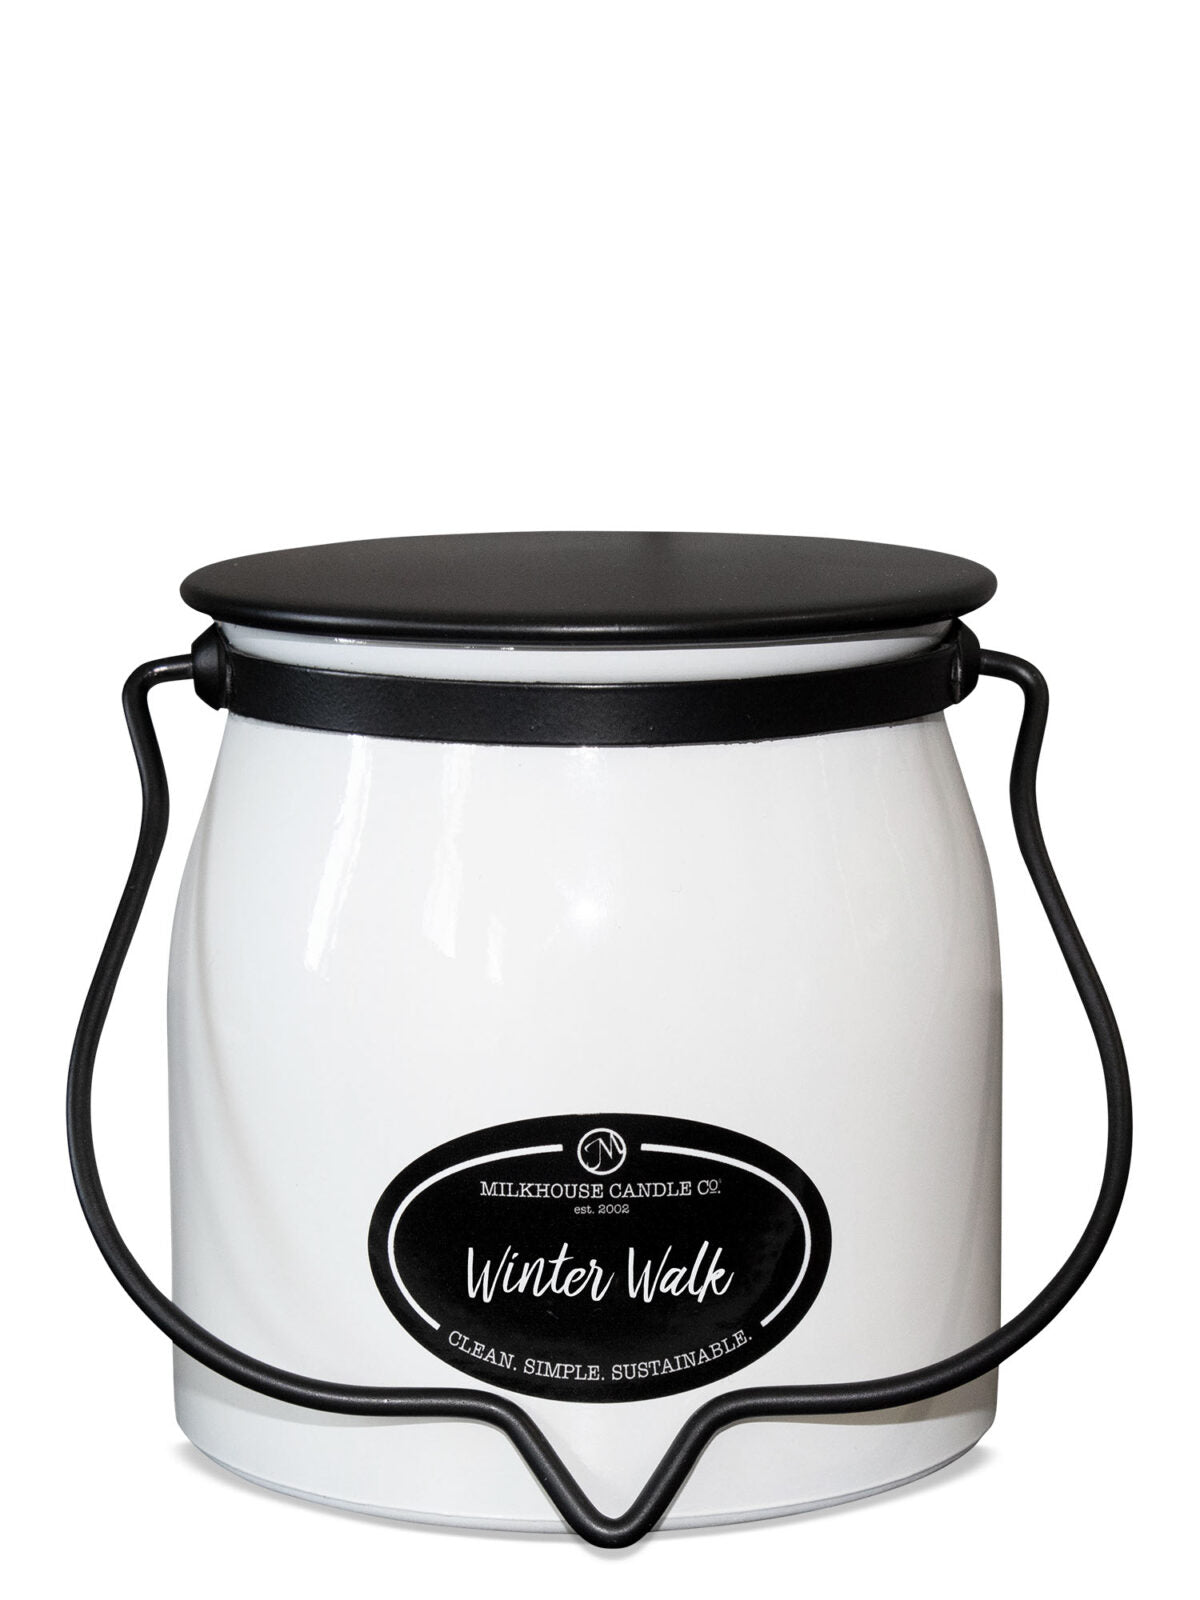 Winter Walk Candle